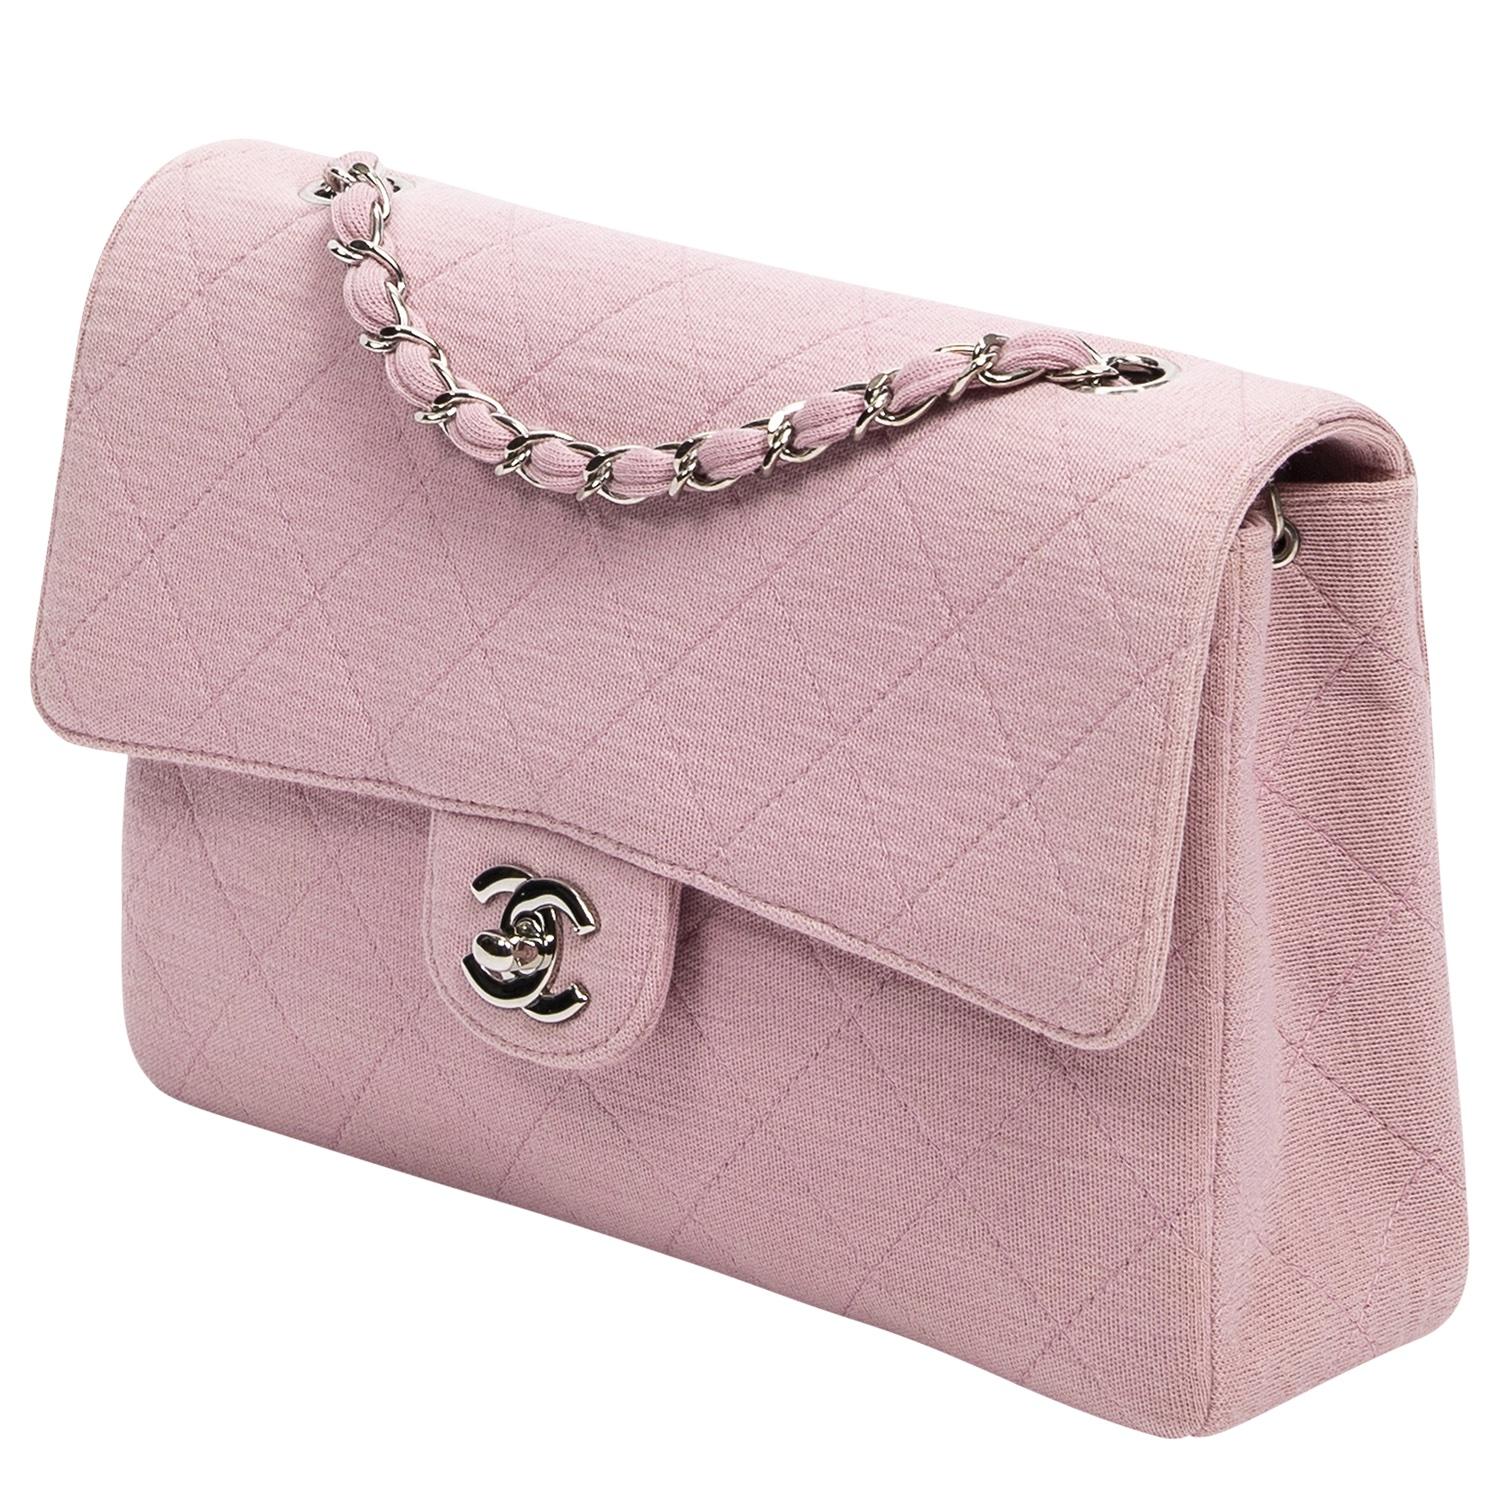 Late 90's pretty in pink vintage beauty. This one's for the subtle with a pop of color gals. Detailed in rose pink quilted canvas, silver-tone hardware, and a single exterior pocket to the back. The iconic CC turnlock closure opens to a leather